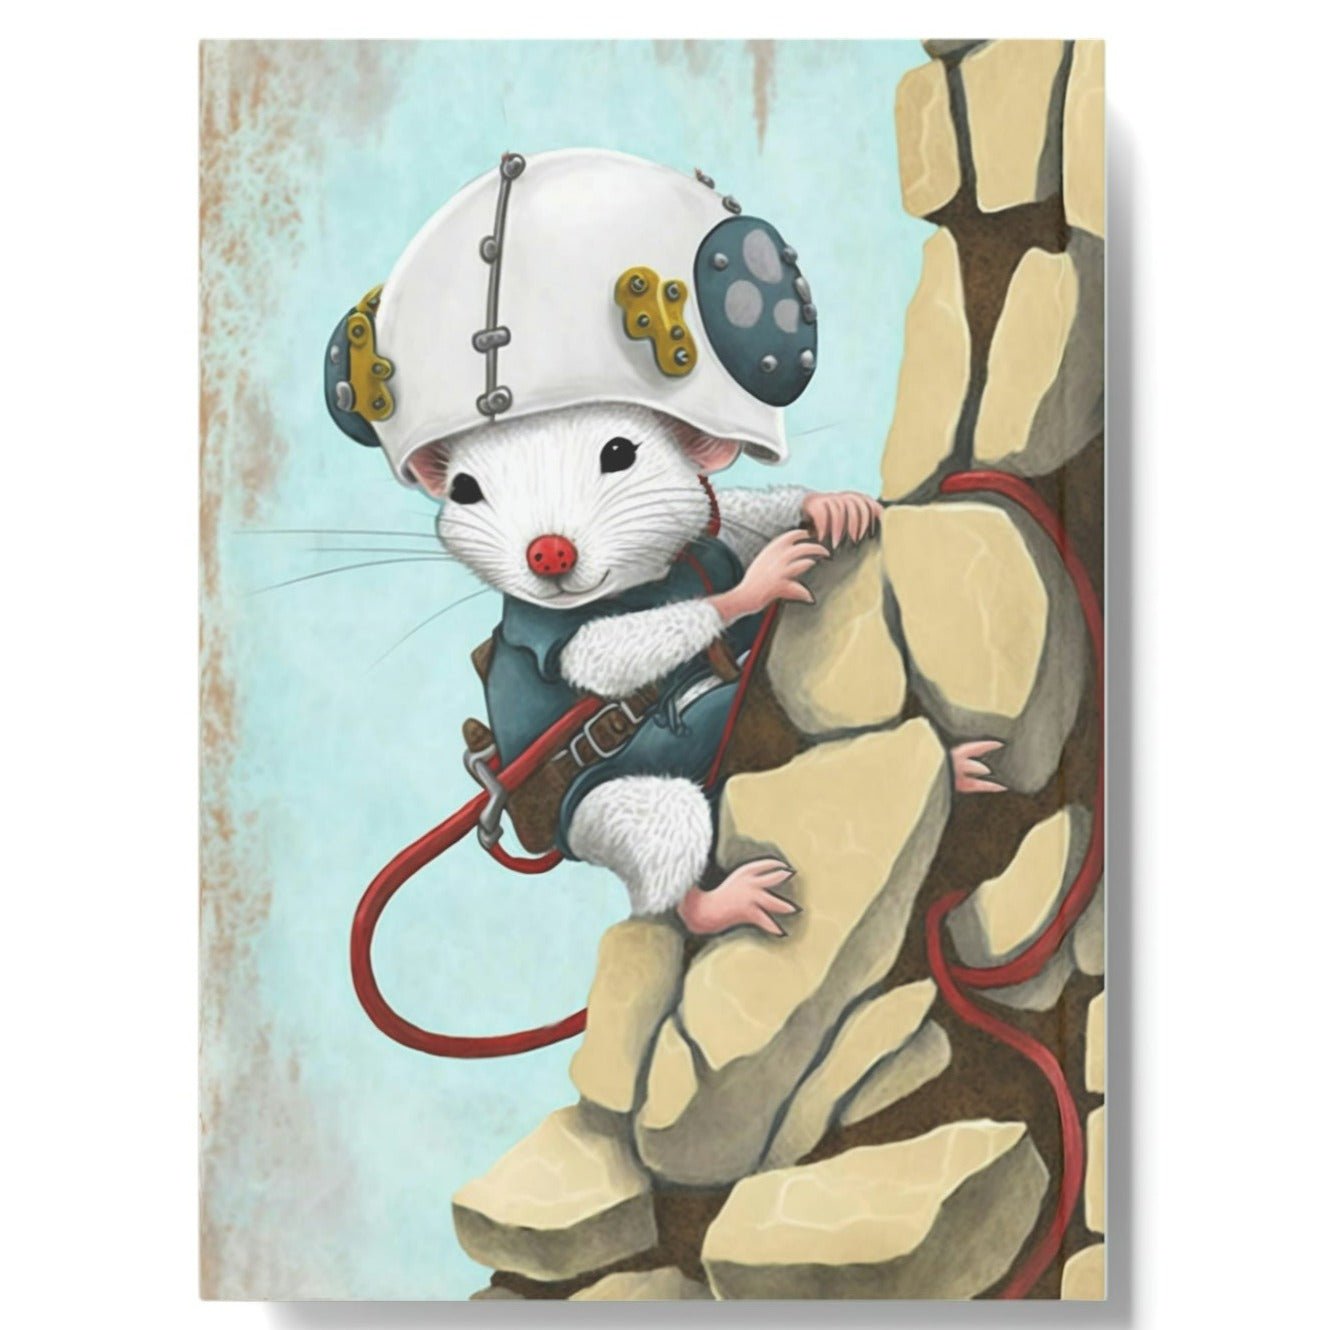 Mountain Climbing Mouse Hard Backed Journal